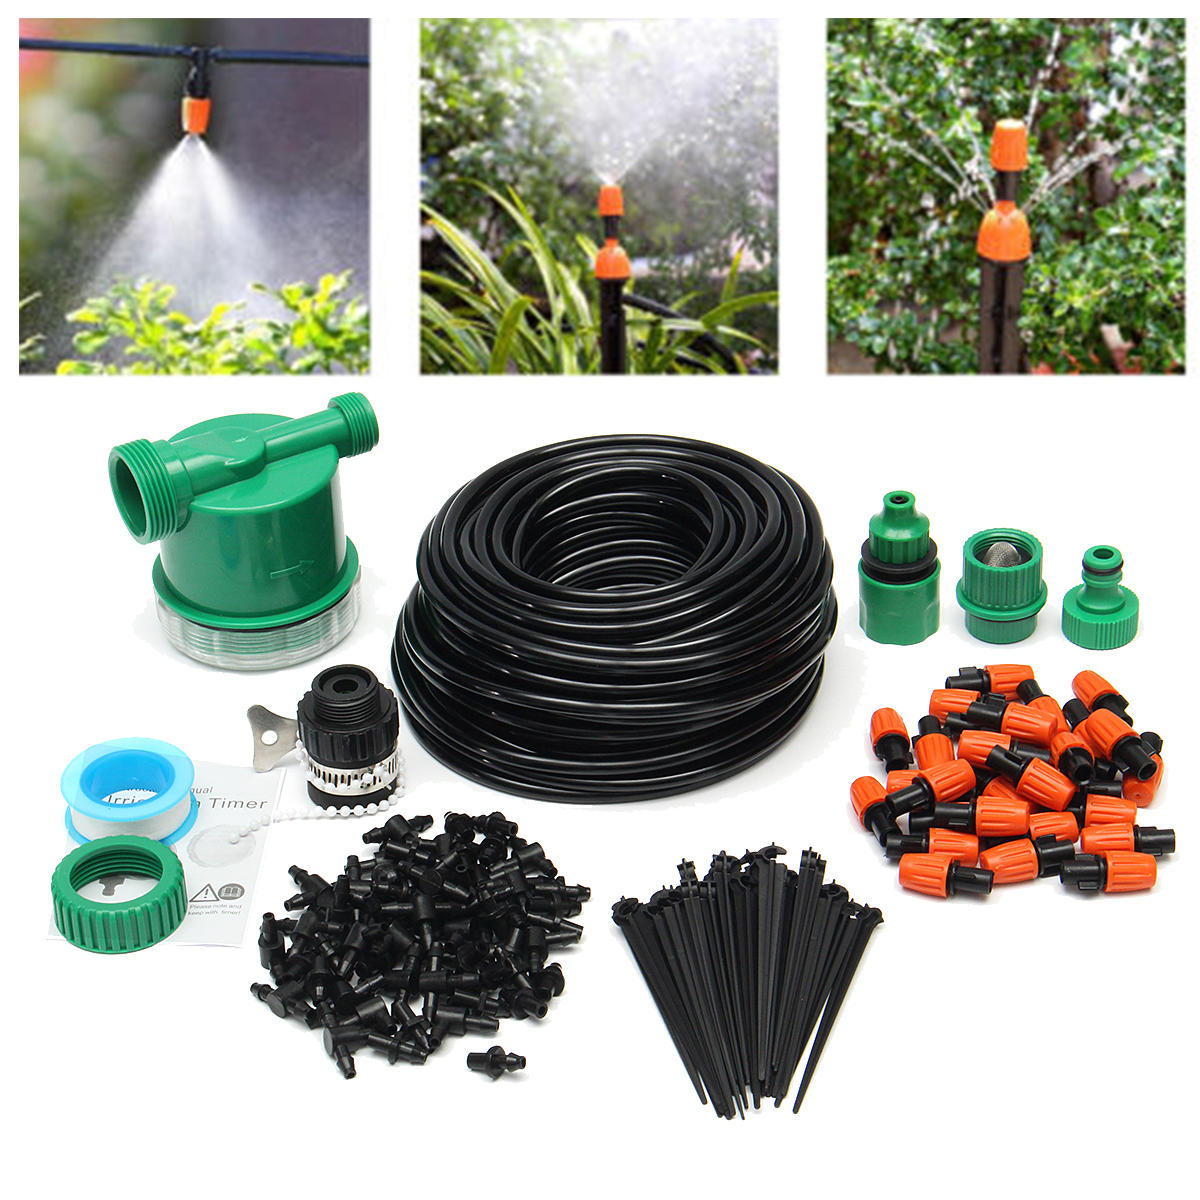 ELECTRONIC WATER TIMER GARDEN HOSE END AUTOMATIC WATERING CONTROLLER